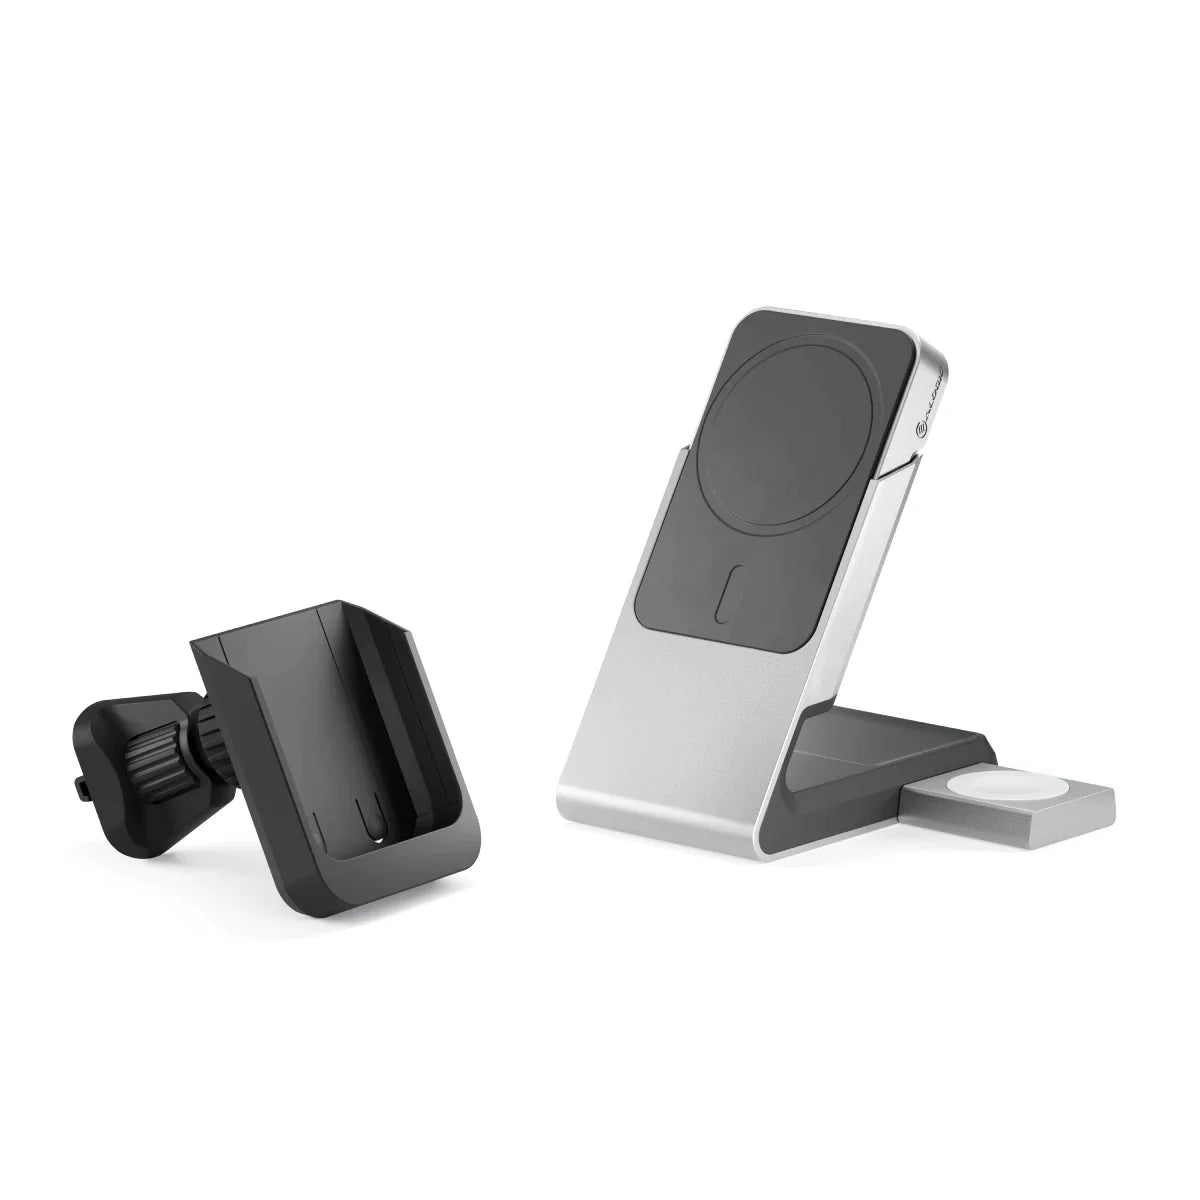 matrix-flow-3-in-1-charging-dock-with-power-bank-and-car-charger_1